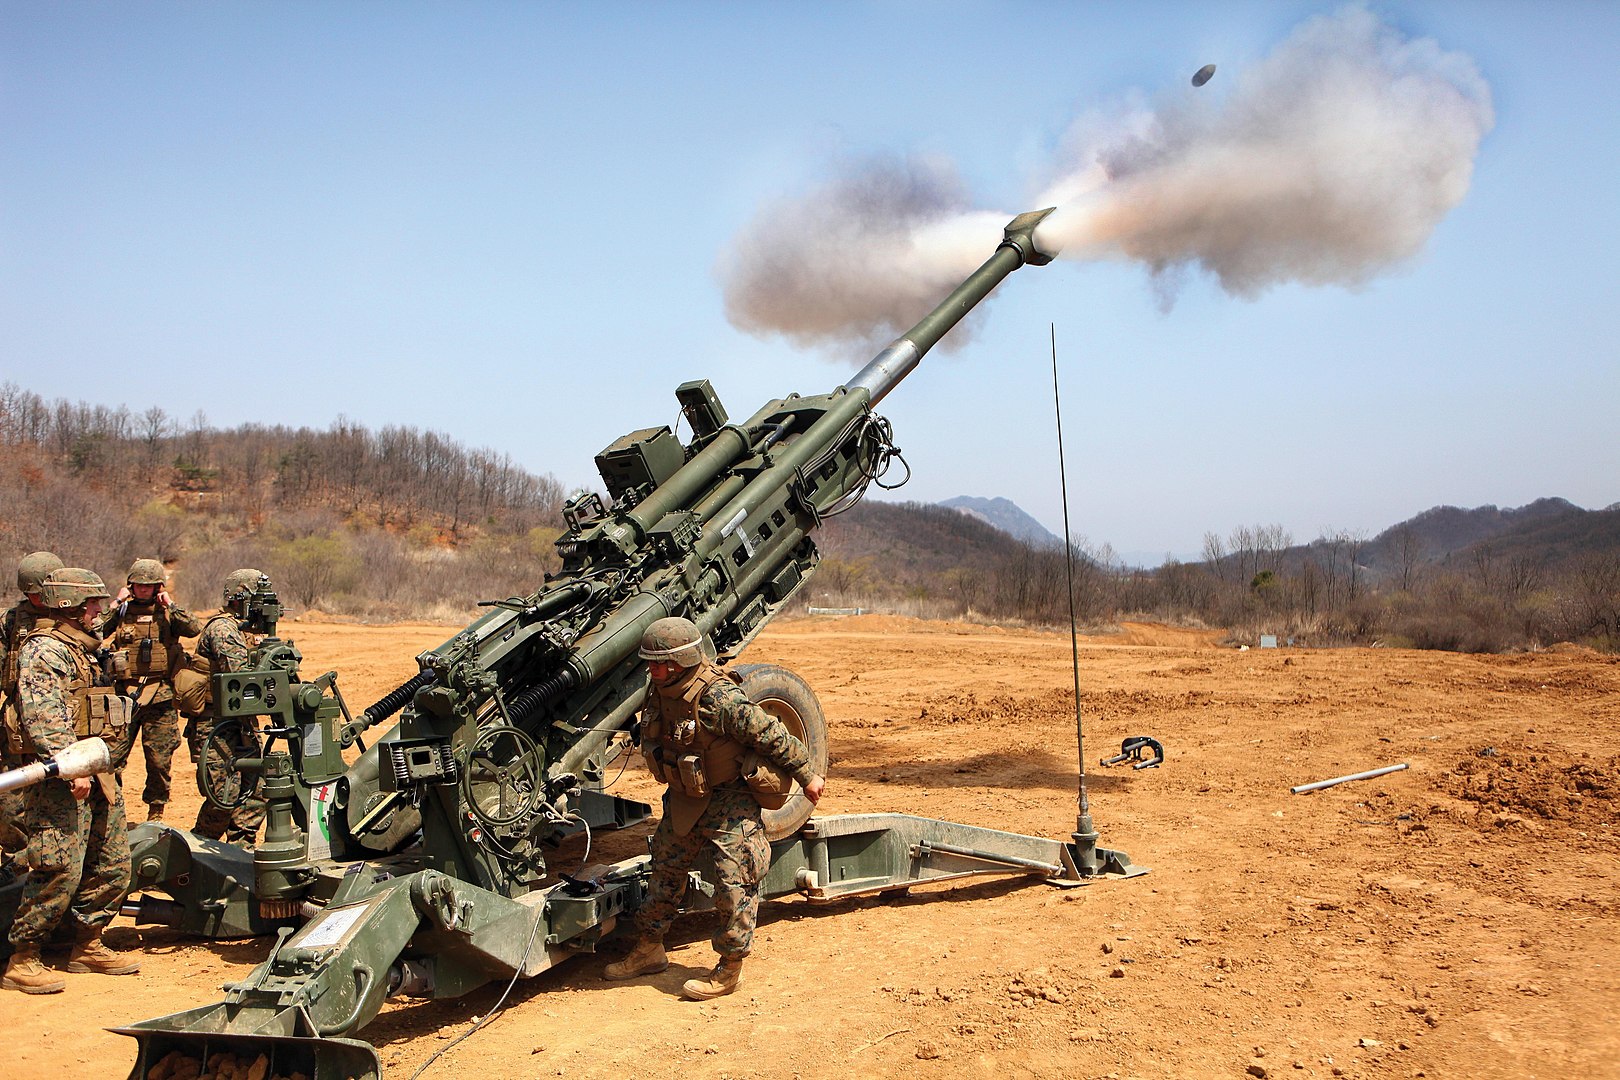 US and India discuss joint production of experimental M777ER howitzers with an extended range of up to 70 km